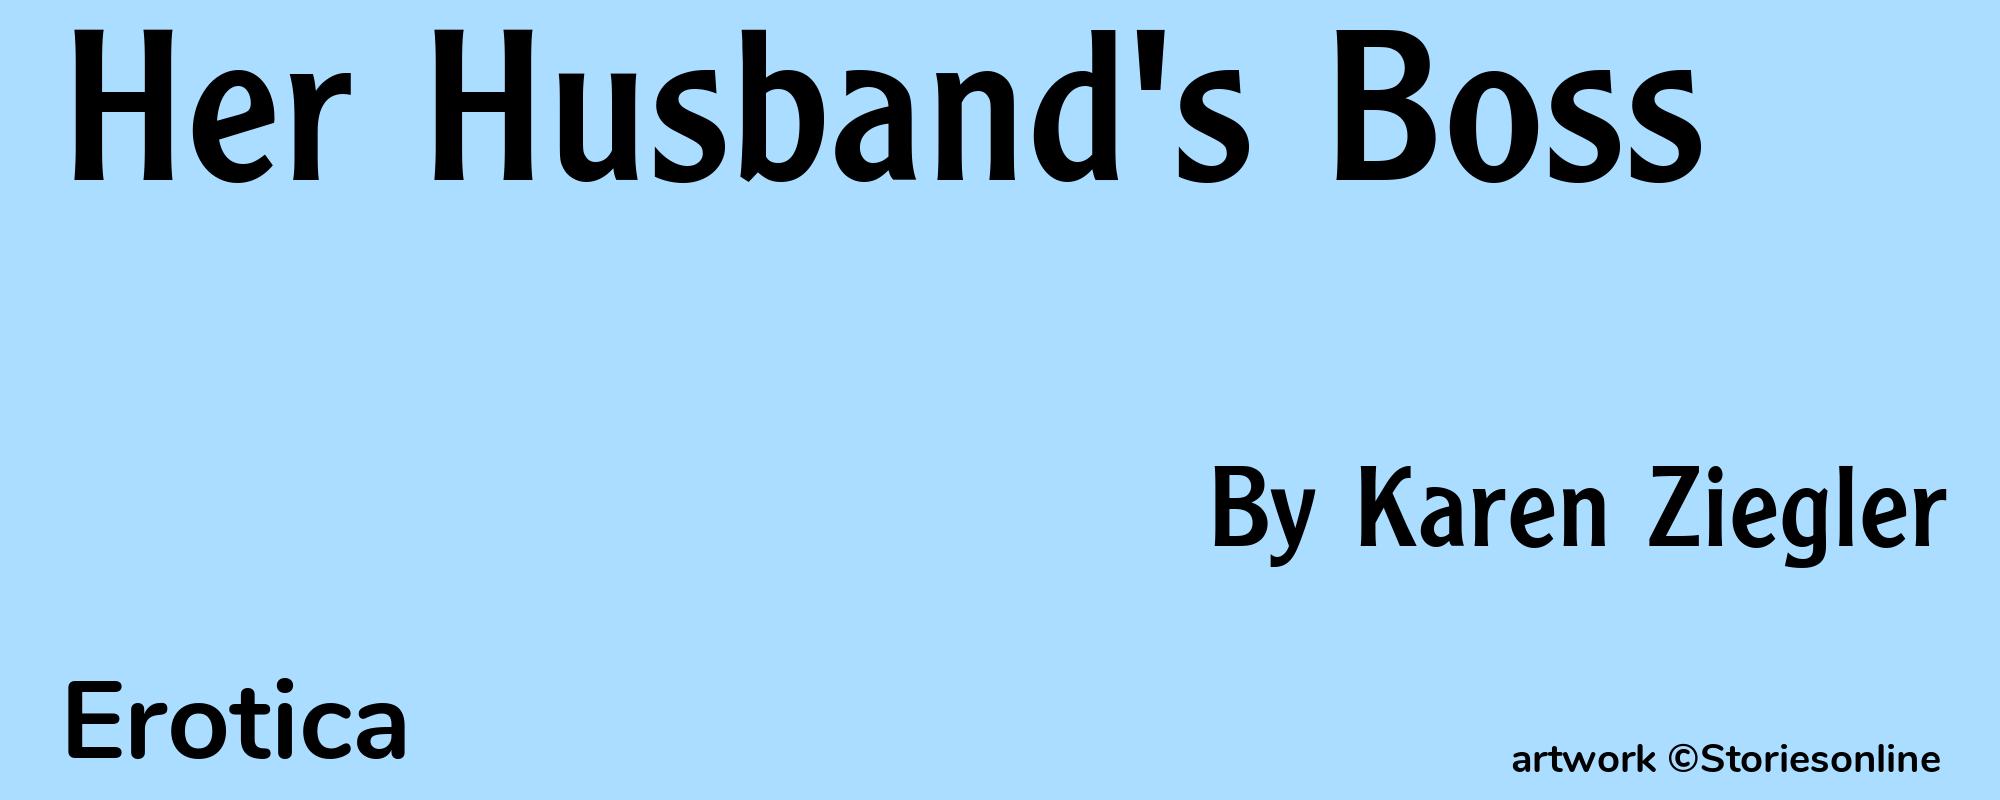 Her Husband's Boss - Cover